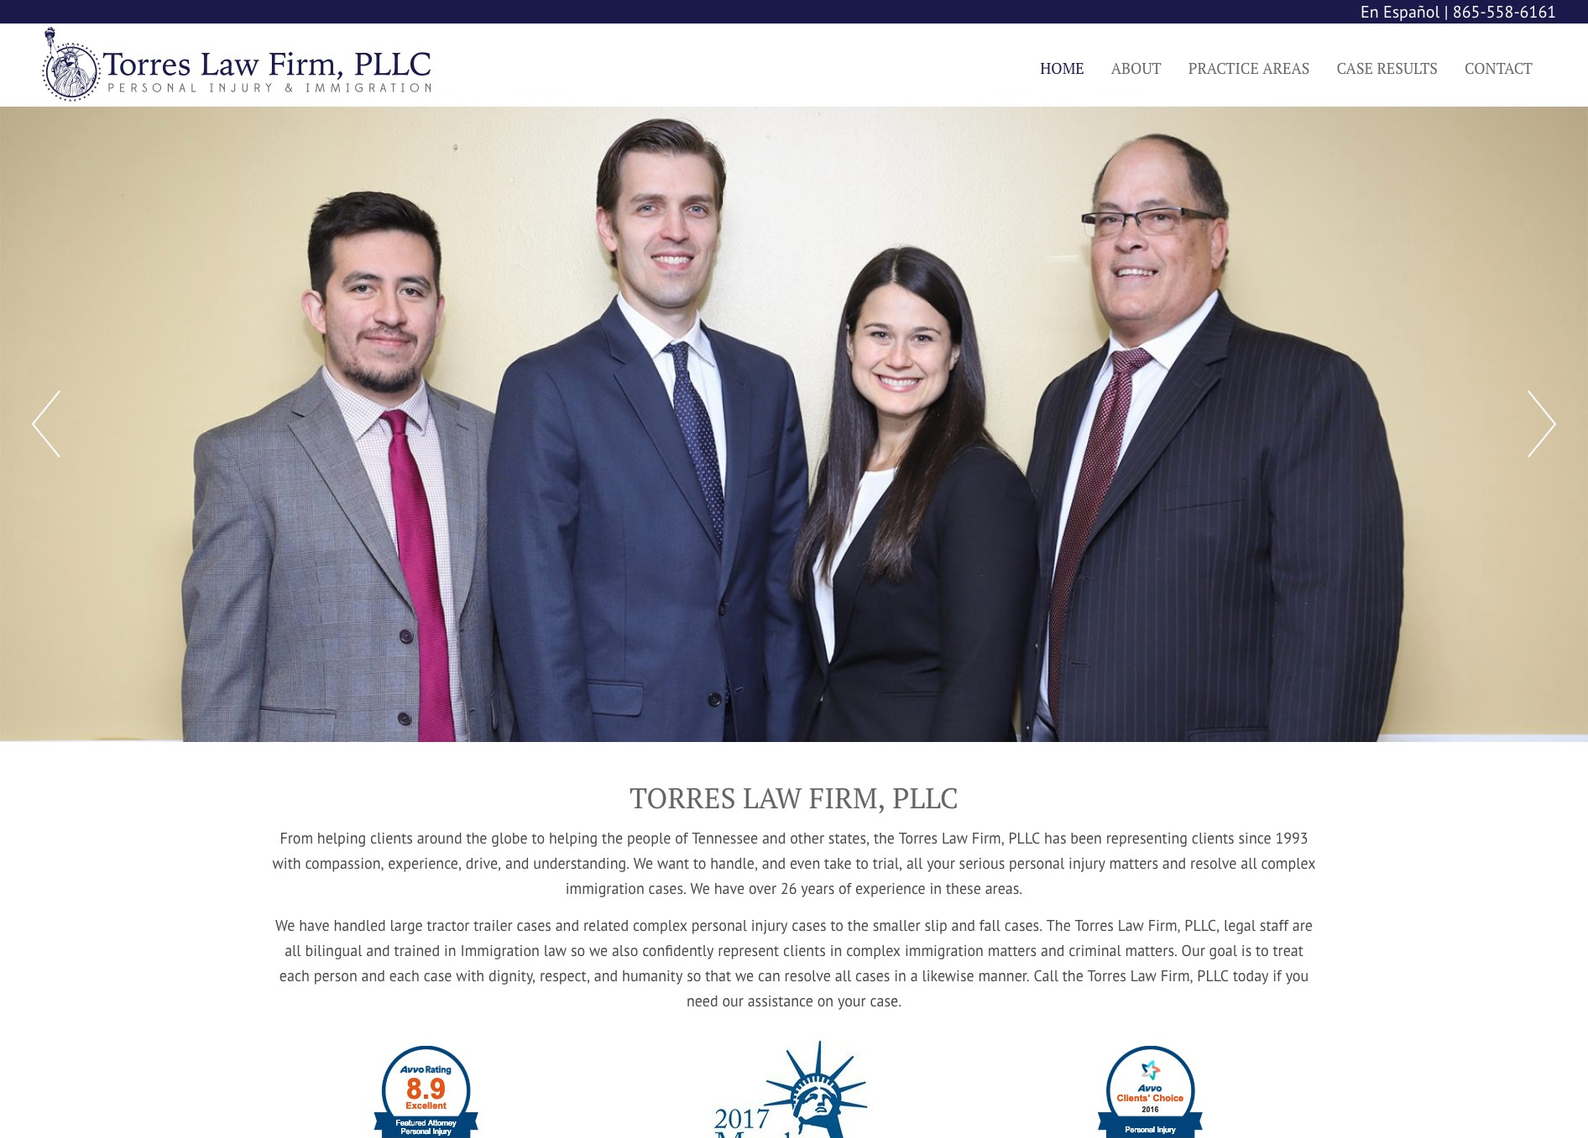 Torres Law Firm, PLLC